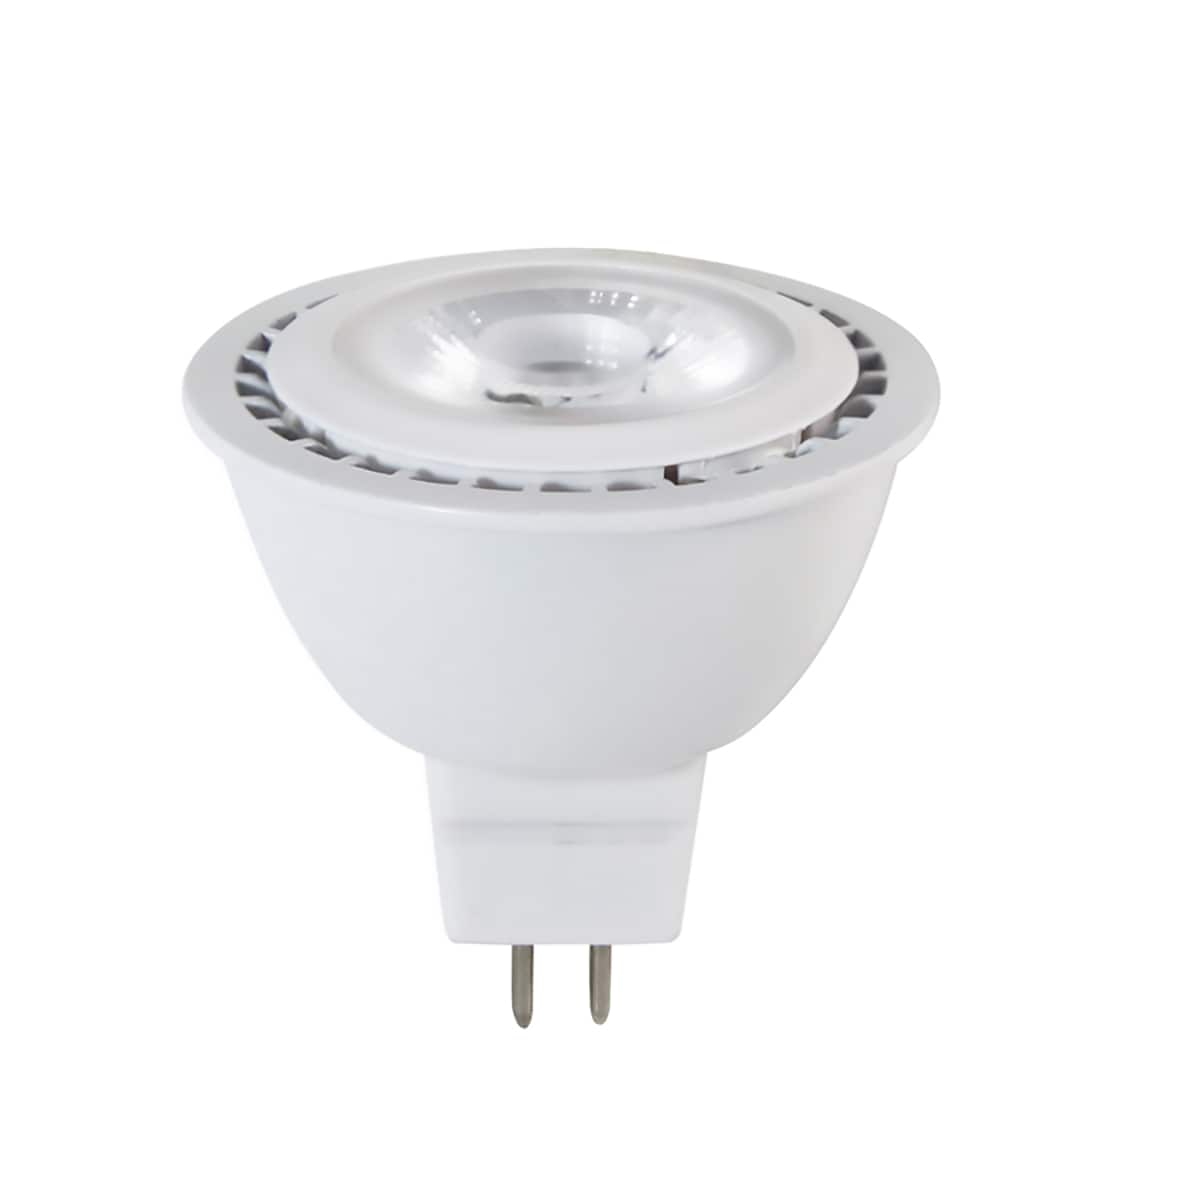 Ansell ANLVT5W Low Voltage MR16 50w 500mm Spot Light White 